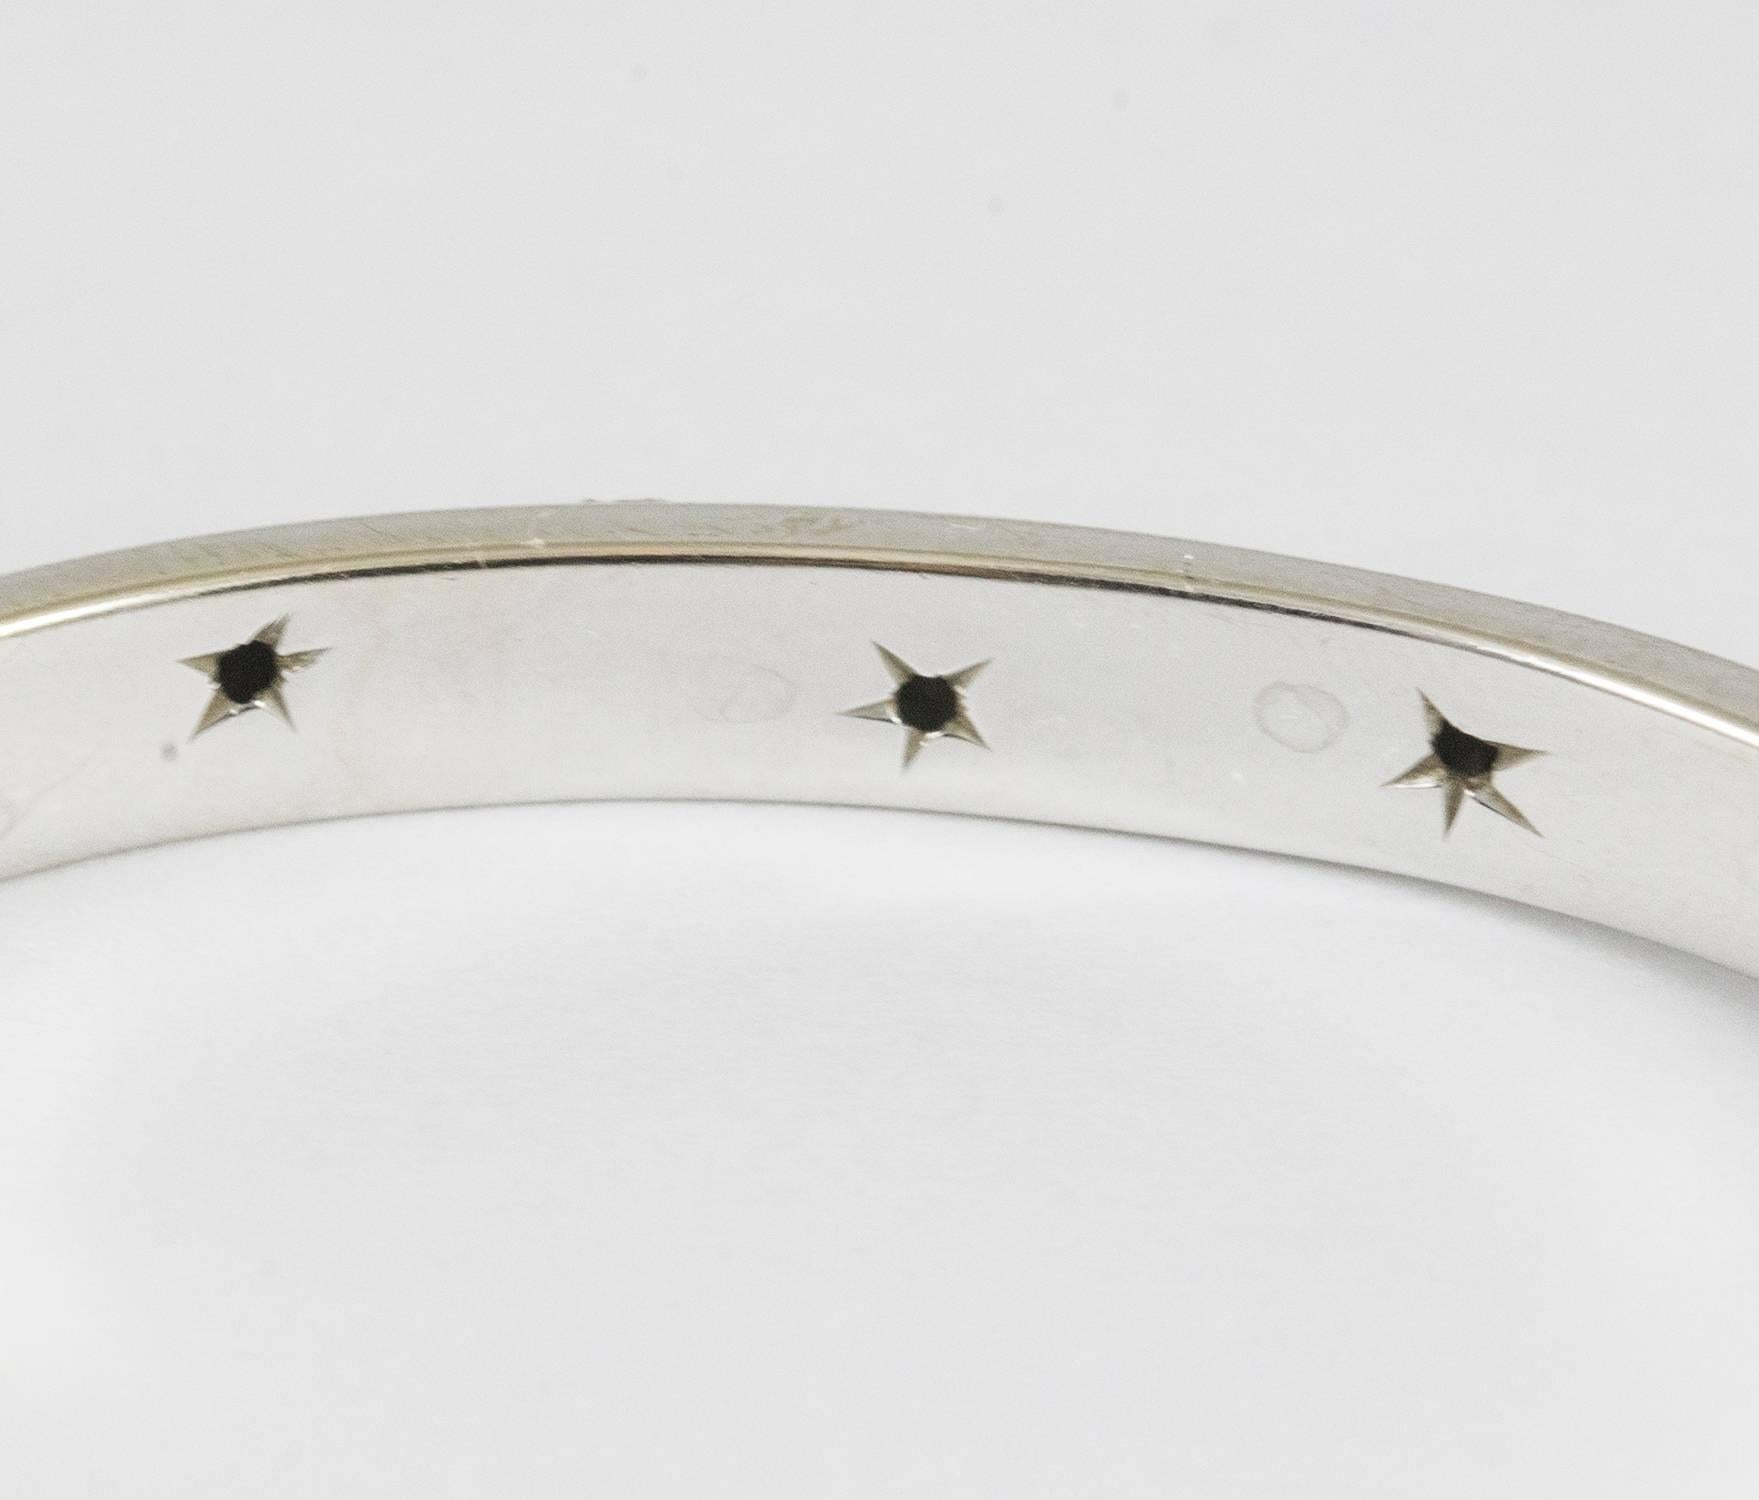 A high quality 18k diamond set bangle. The bracelet holds 126 round brilliant cut diamonds that are finely bead set (3.78 cts. F-G, SI1-SI2). The cut is excellent-very good. The interior of the bracelet measures 7 inches and it is in excellent